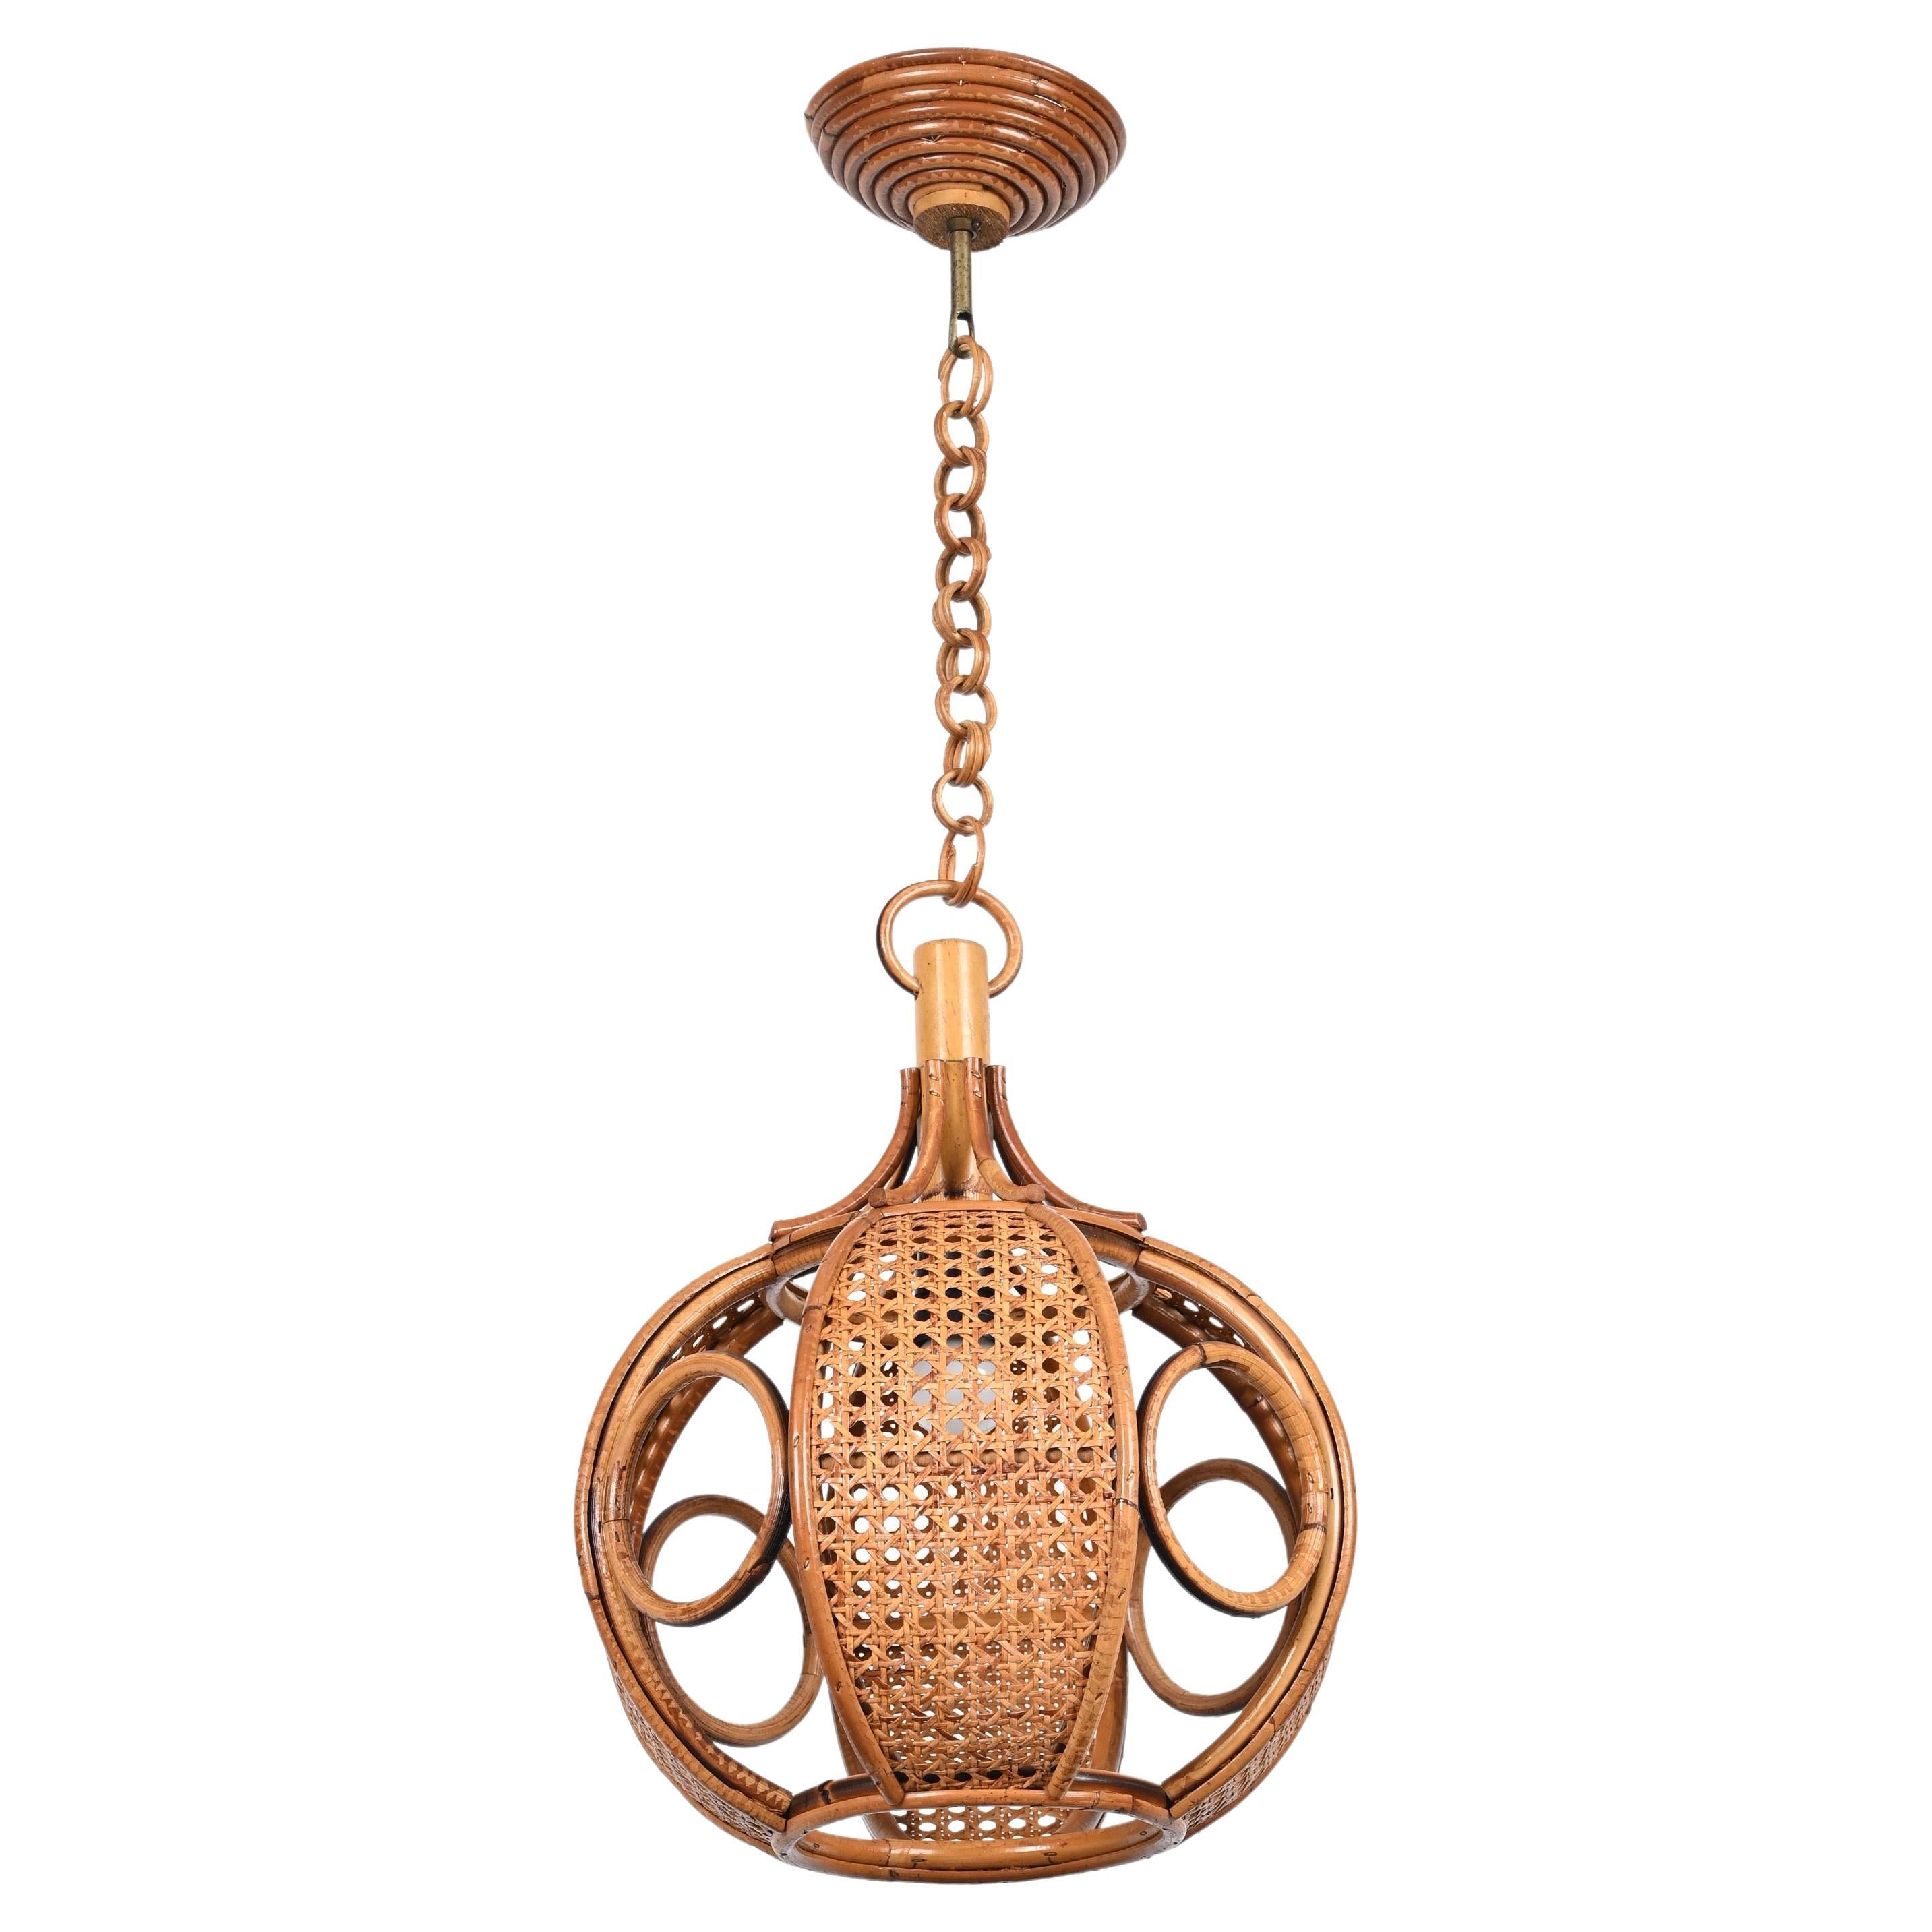 Marvellous rattan and wicker pendant chandelier in French Riviera style. This incredible piece was realized in Italy during the 1960s.

This unique pendant features a gorgeous shade in hand-woven Vienna straw wicker, curved rattan and bamboo. The